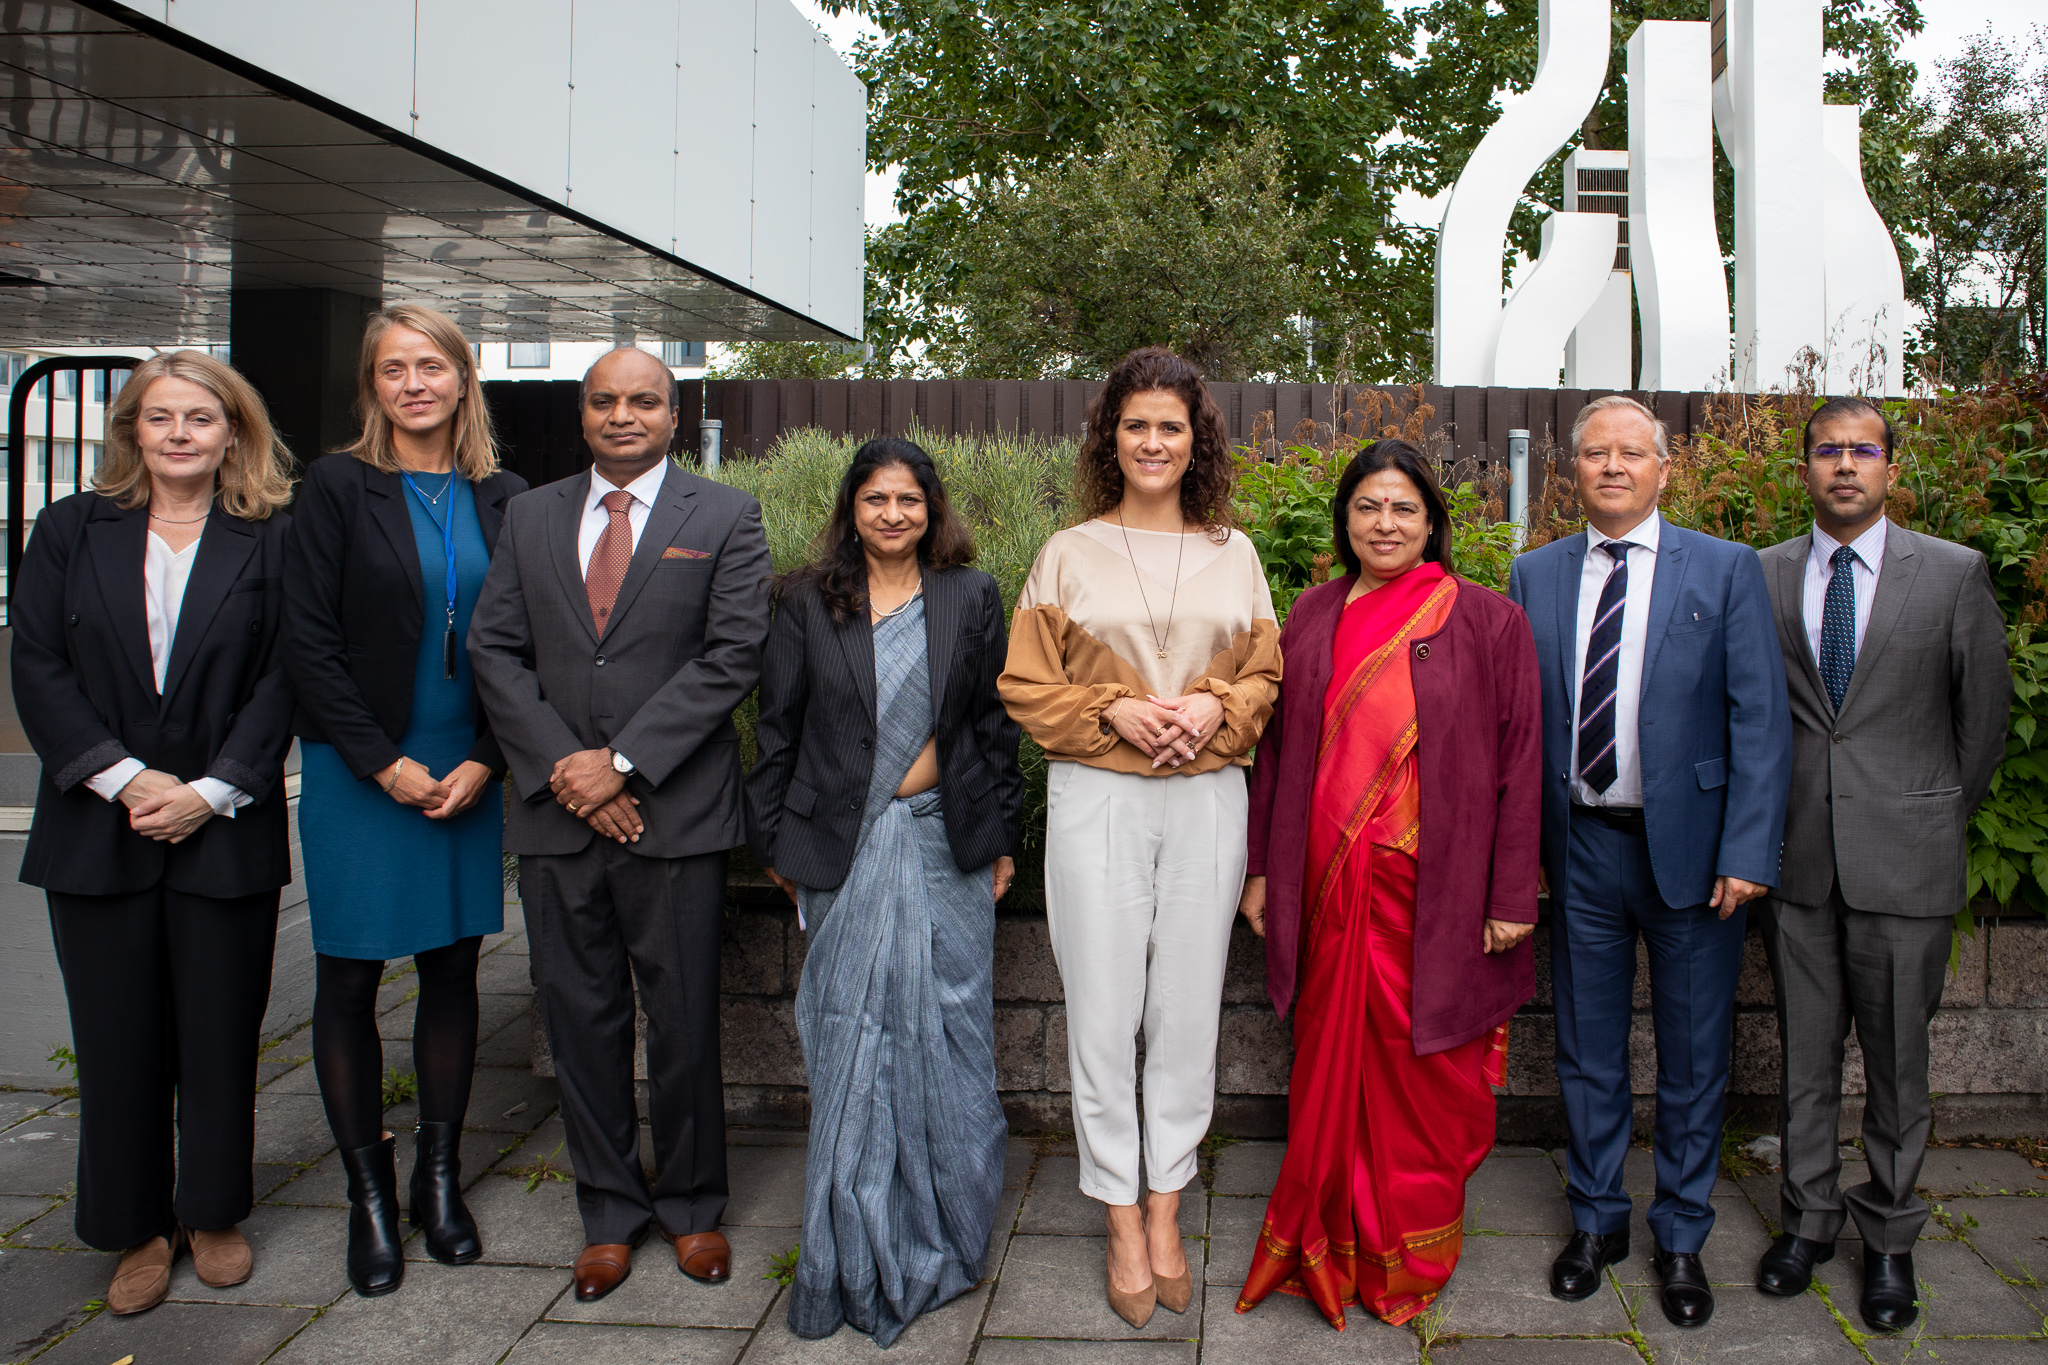  Minister of State for External Affairs and Culture Smt. Meenakashi Lekhi met Icelandic Foreign Minister Ms. Th�rd�s Kolbr�n Reykfj�rd Gylfad�ttir on the occasion of 50th anniversary of diplomatic ties between India and Iceland, 19 August 2022